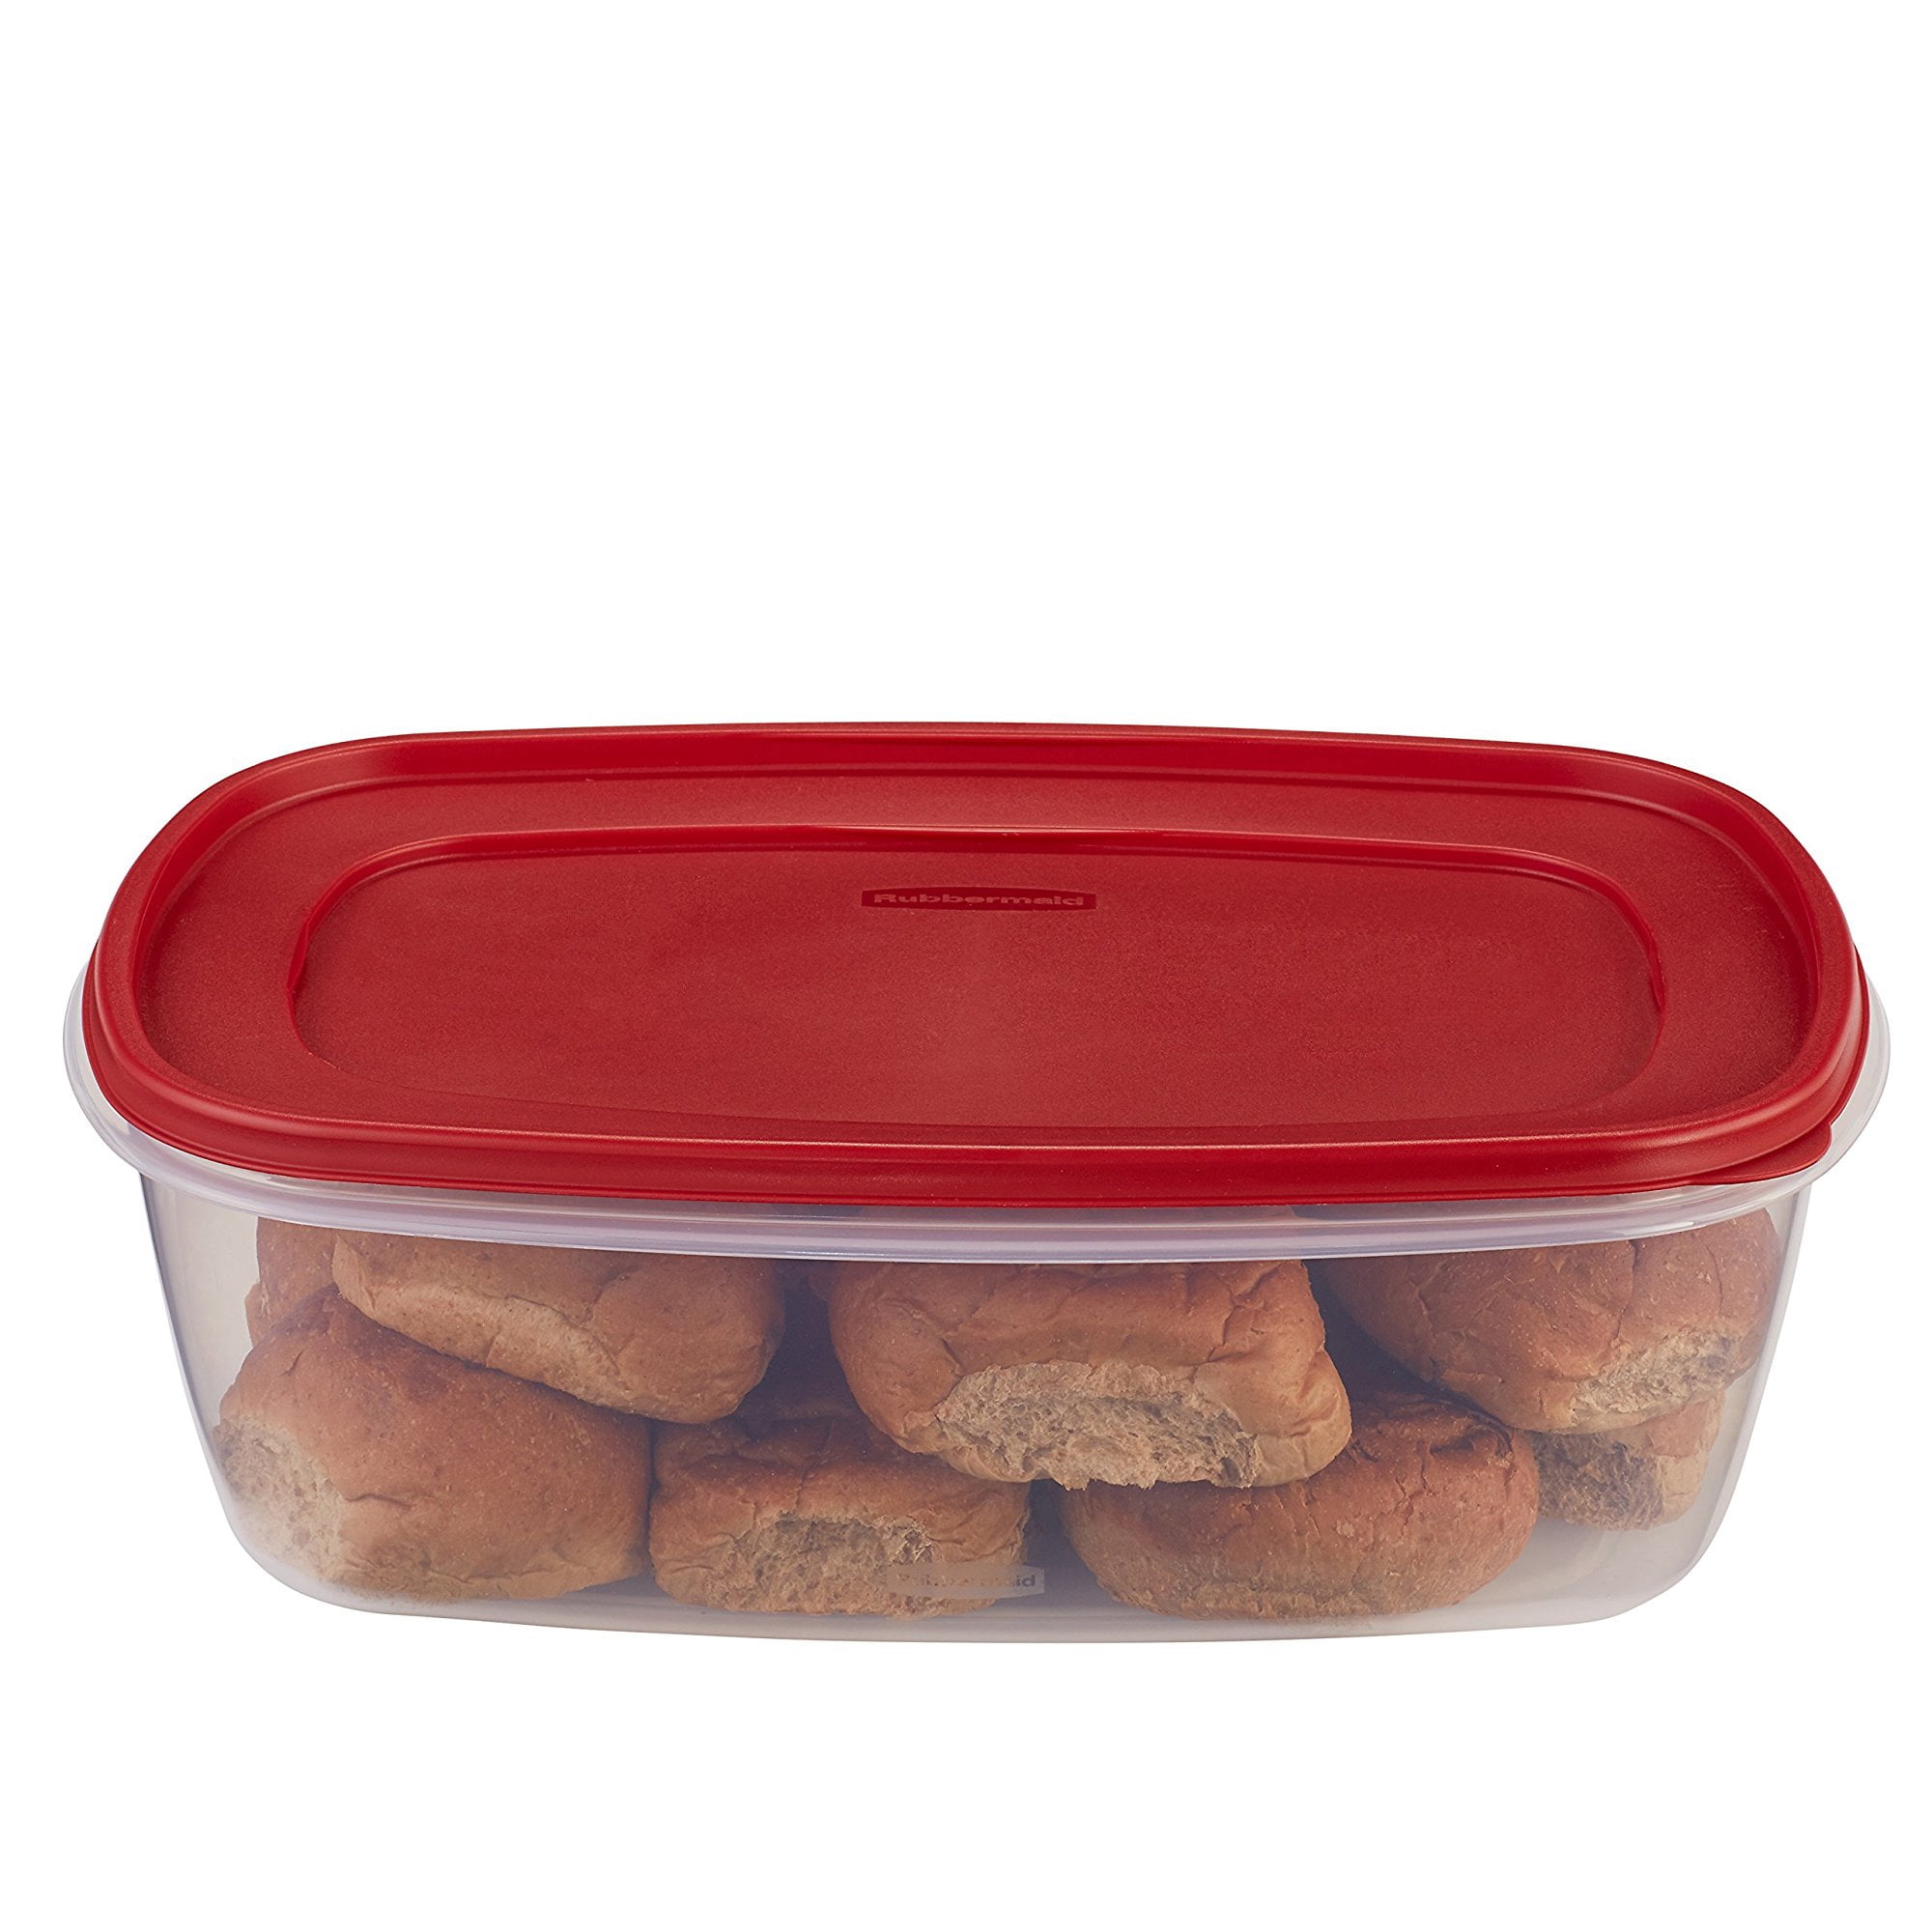 Rubbermaid 2.5 gal Clear/Red Food Storage Container 1 pk - Ace